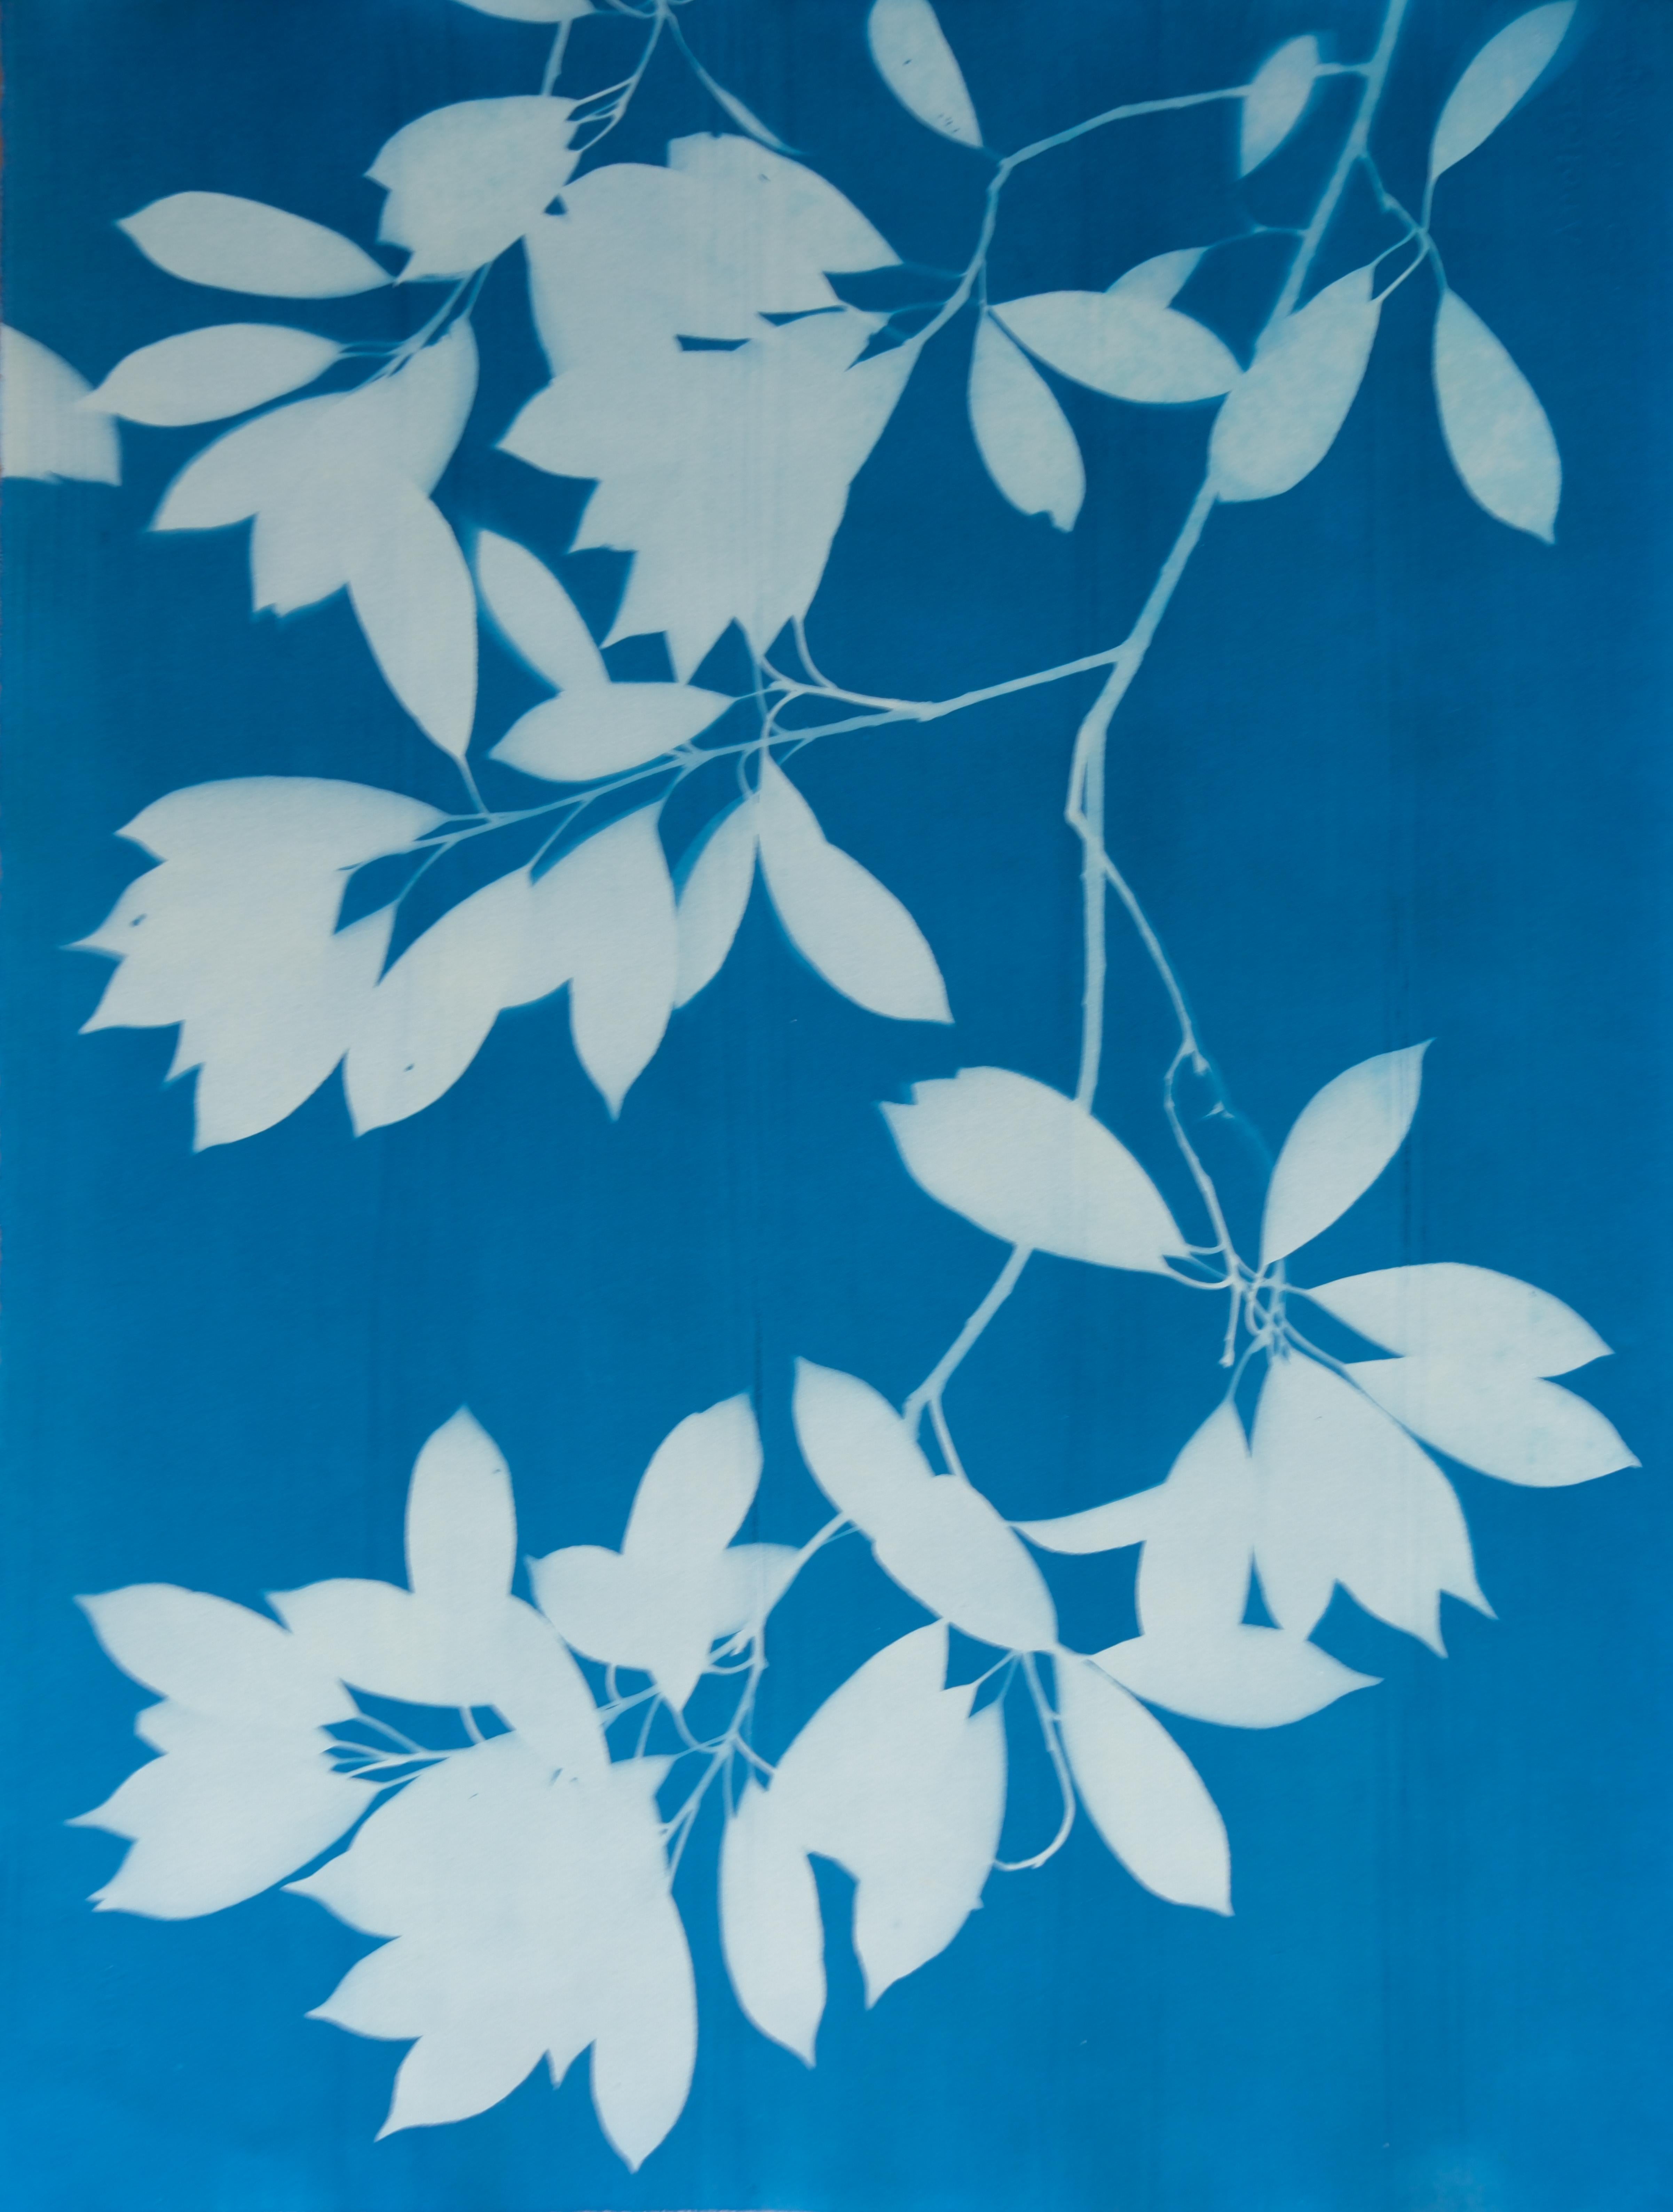 Evening Shade Triptych (3 hand-printed botanical cyanotypes, 30 x 22 in. each) - Print by Christine So